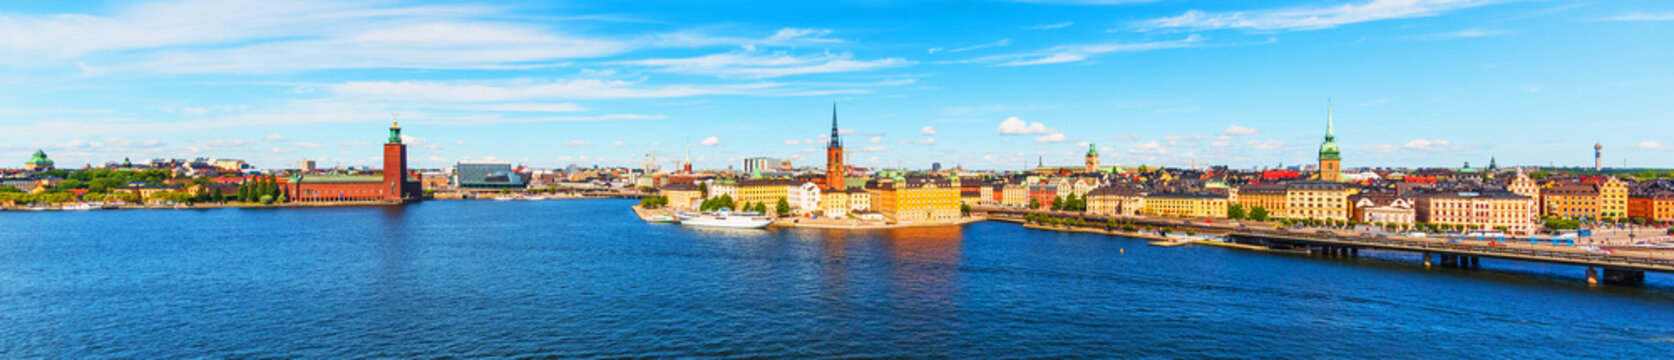 Panorama of the Old Town of Stockholm, Sweden